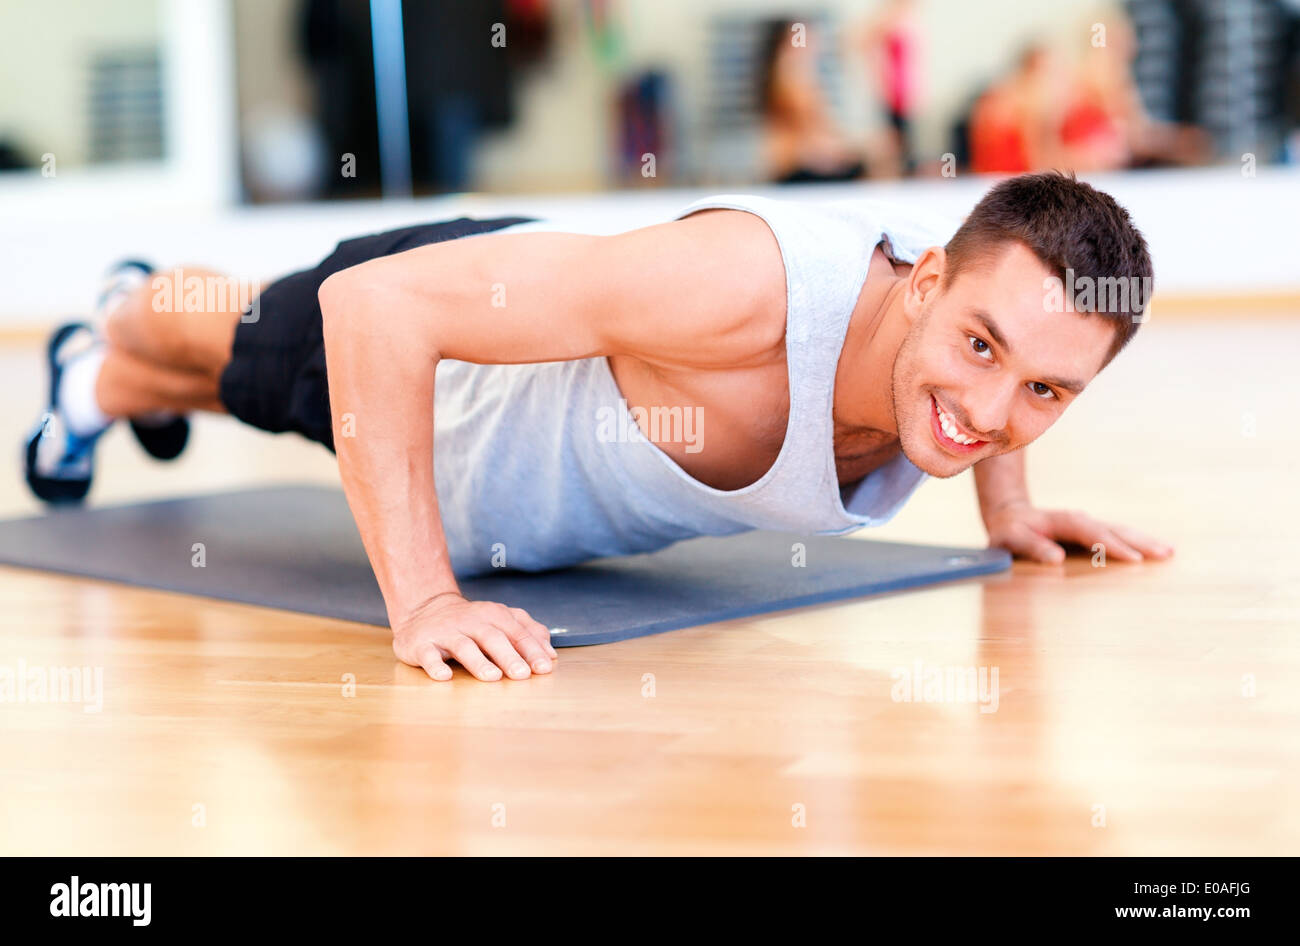 smiling man doing push-ups in the gym Stock Photo